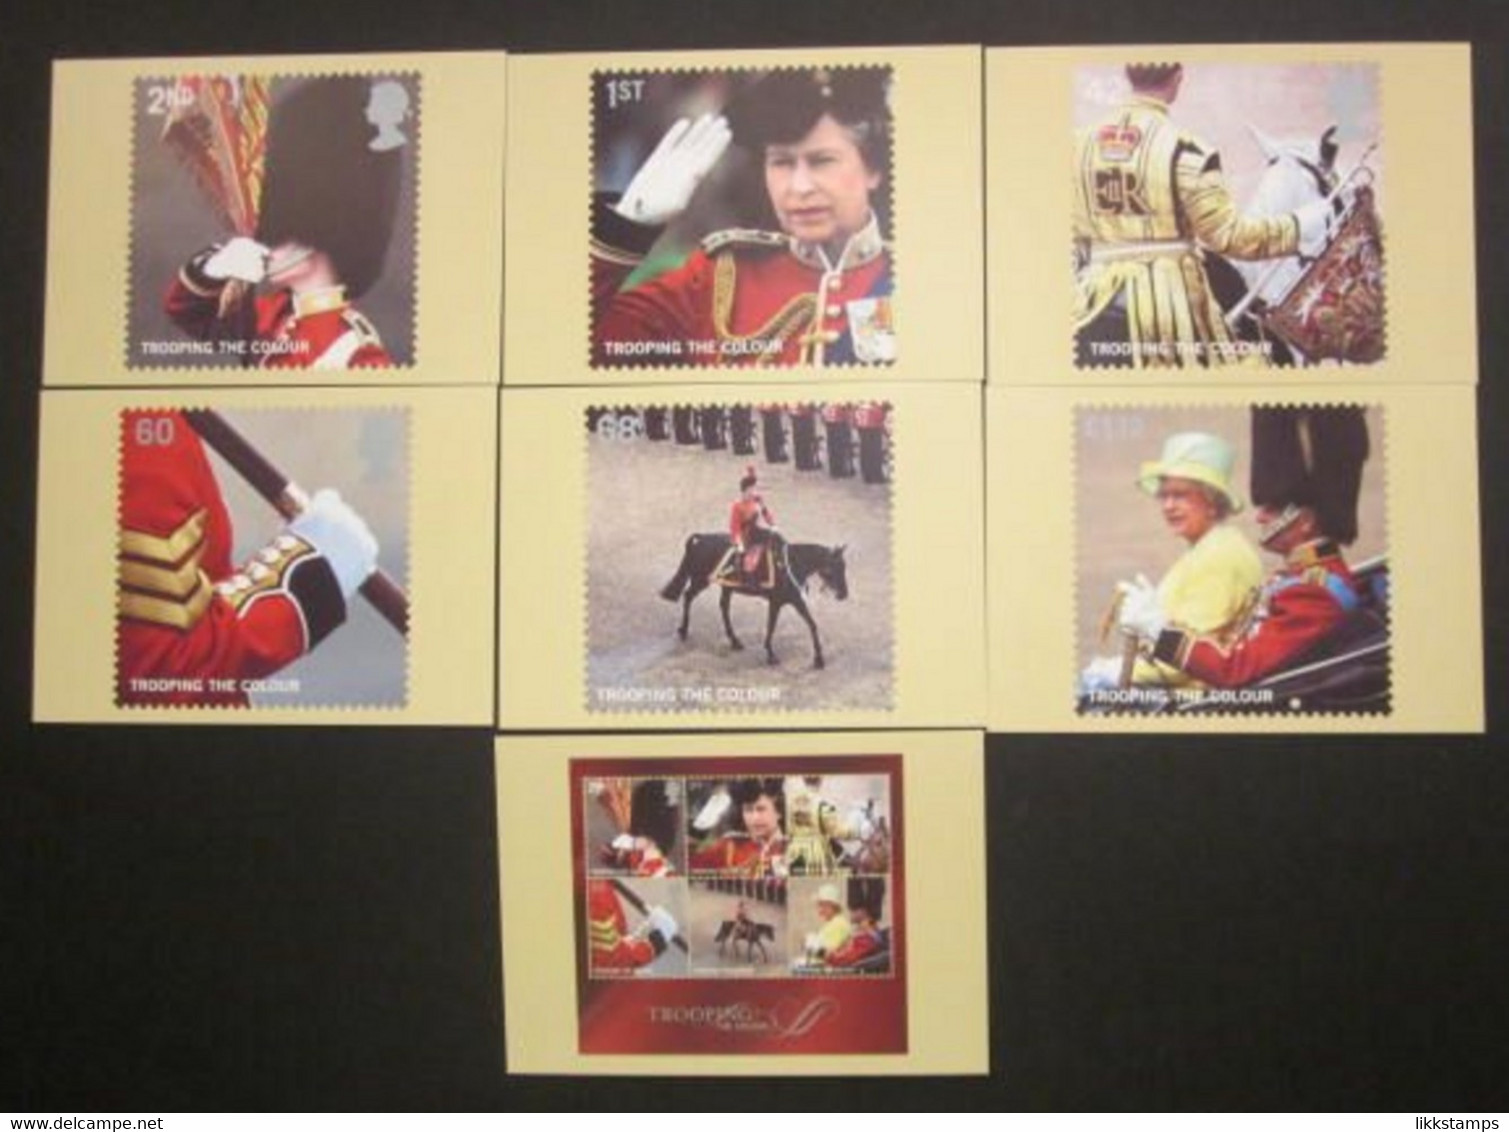 2005 TROOPING THE COLOUR P.H.Q. CARDS UNUSED, ISSUE No. 276 (B) #00839 - PHQ Karten